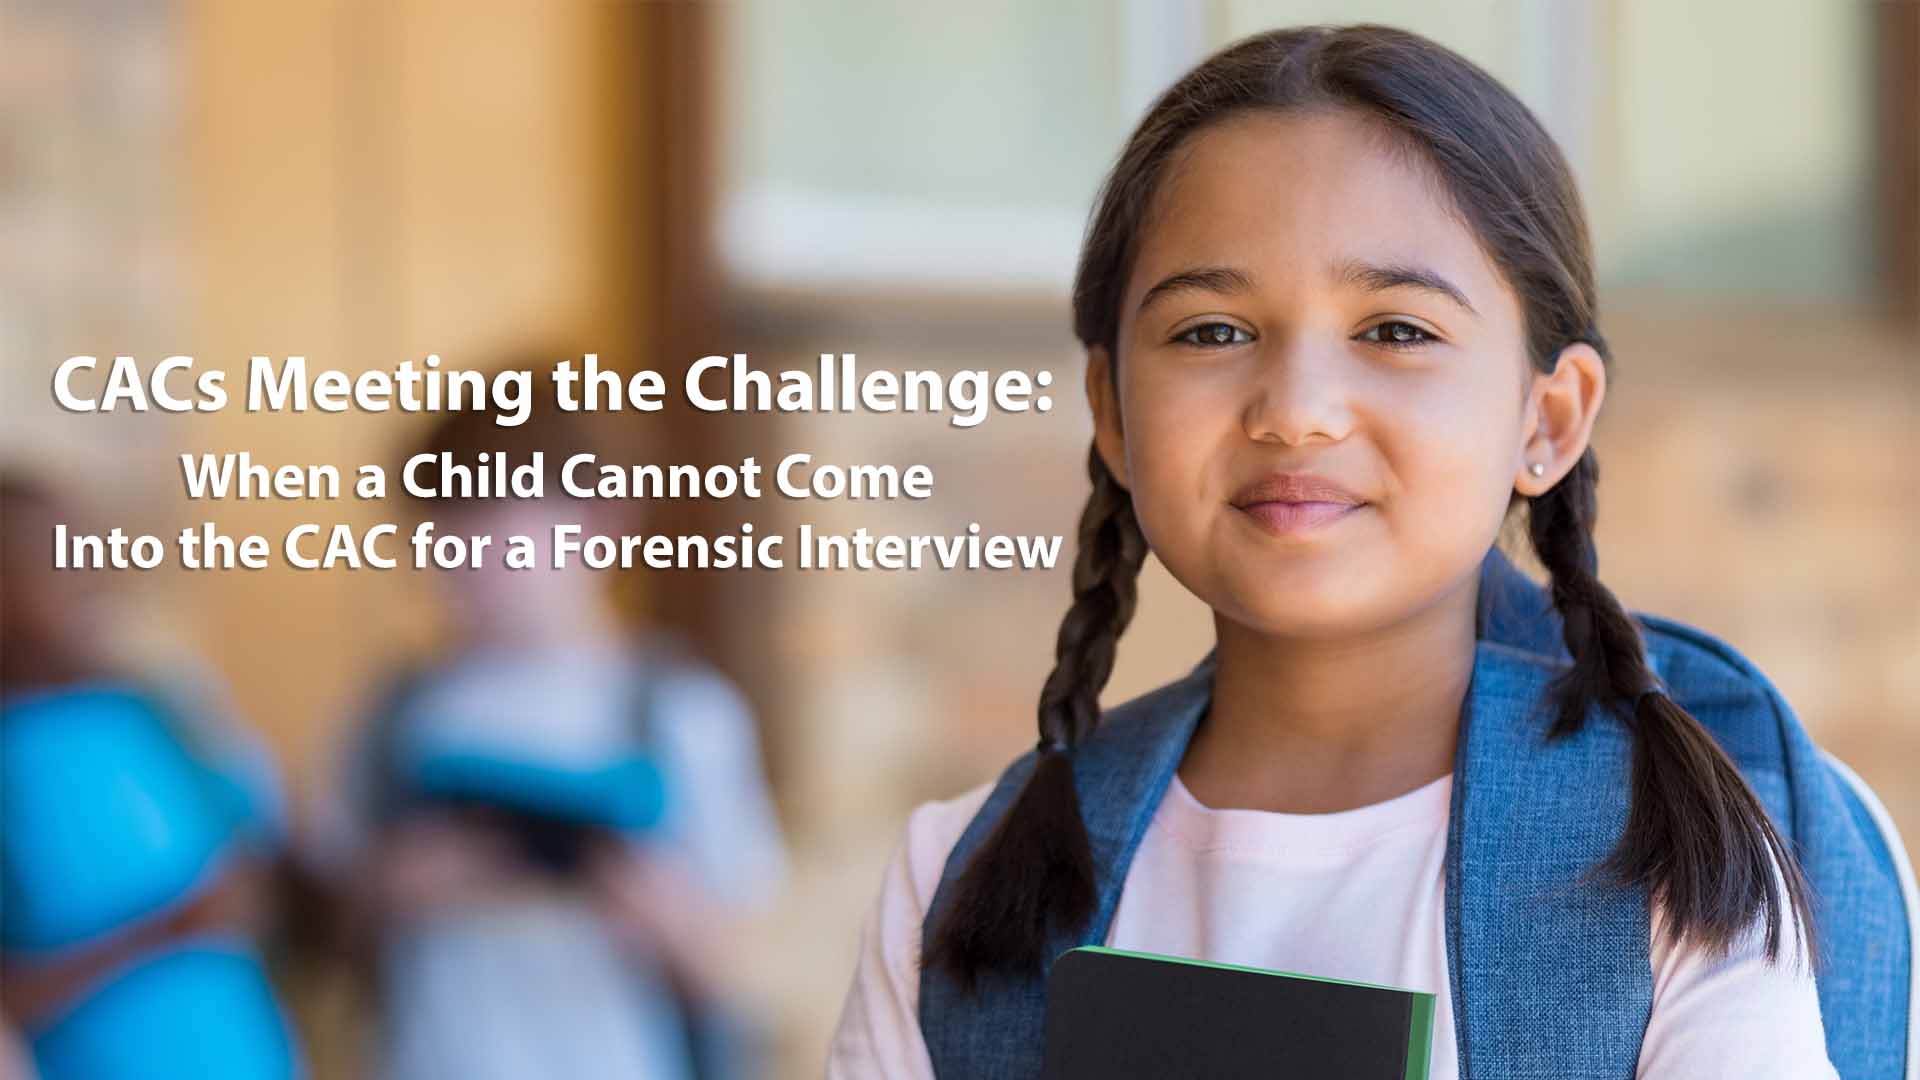 CACs Meeting the Challenge: When a Child Cannot Come Into the CAC for a Forensic Interview